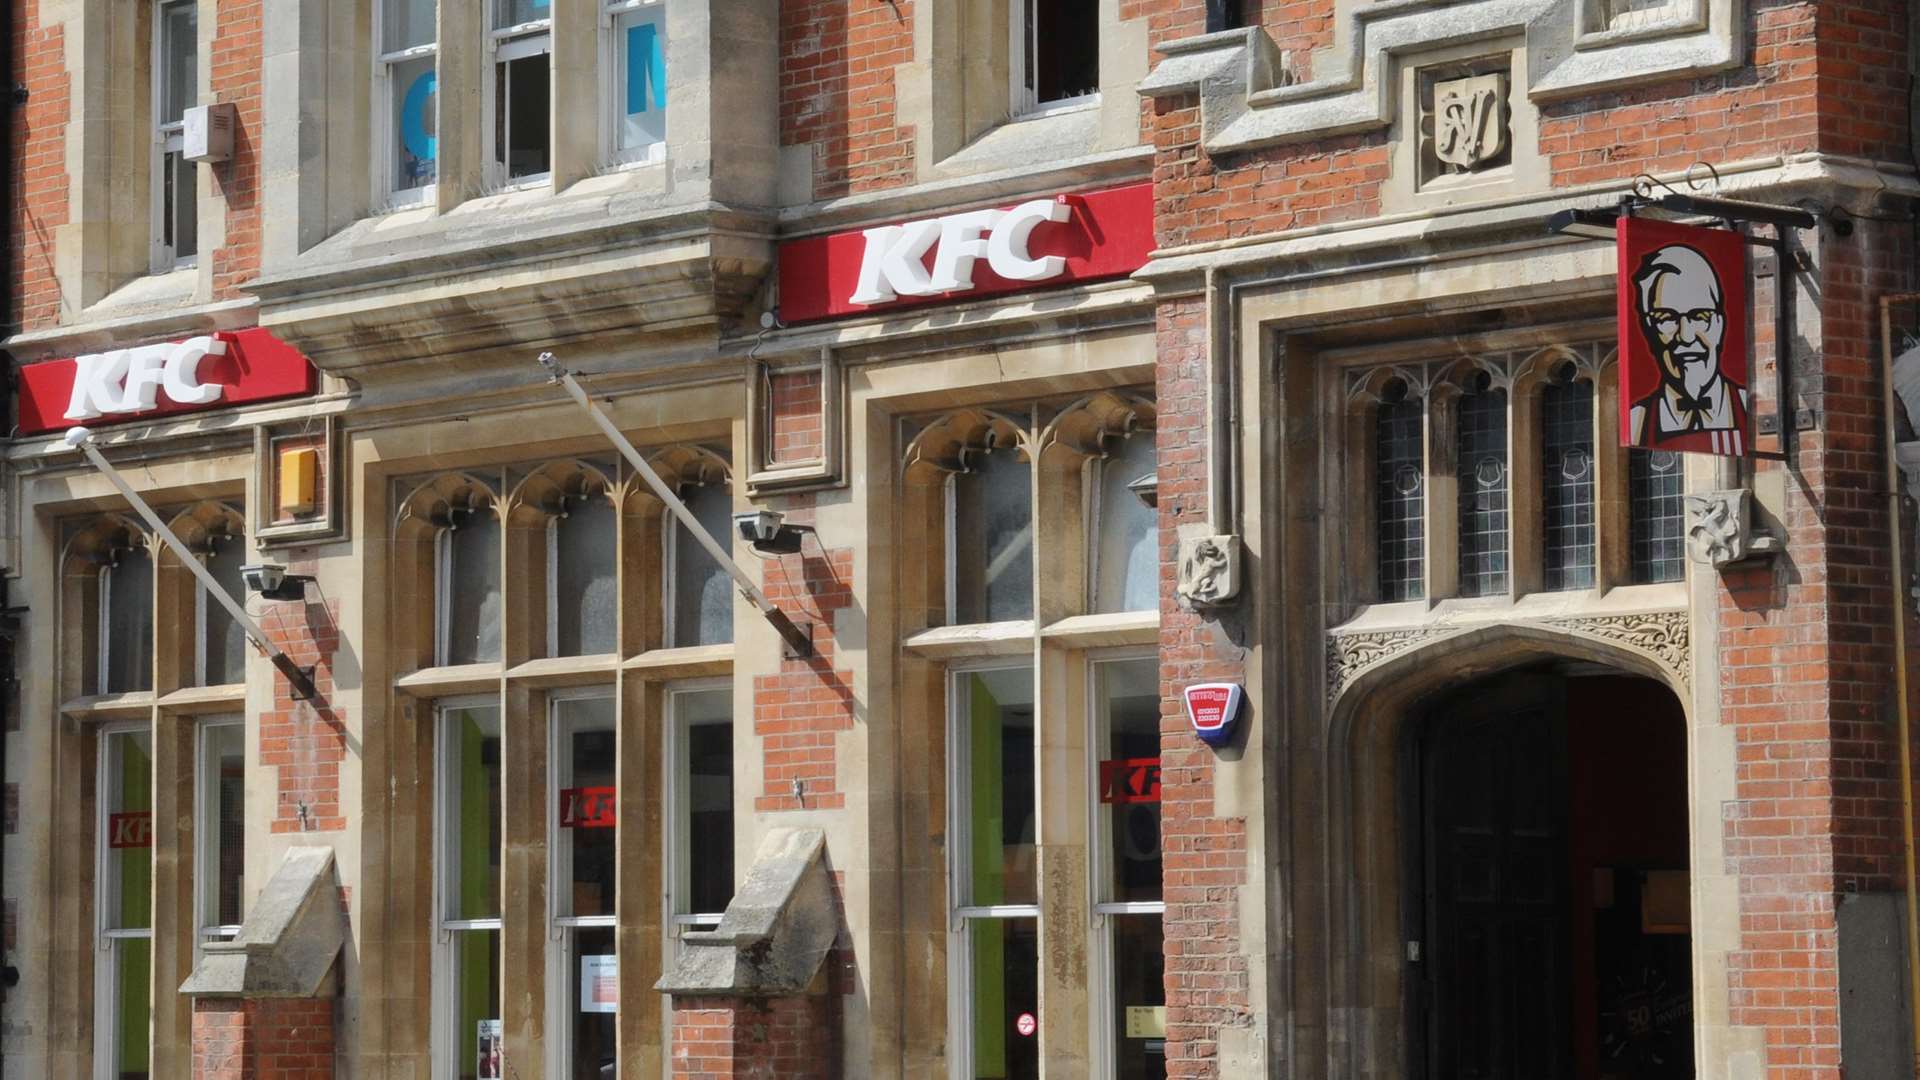 KFC at Sandgate Road, Folkestone, not yet listed as reopened